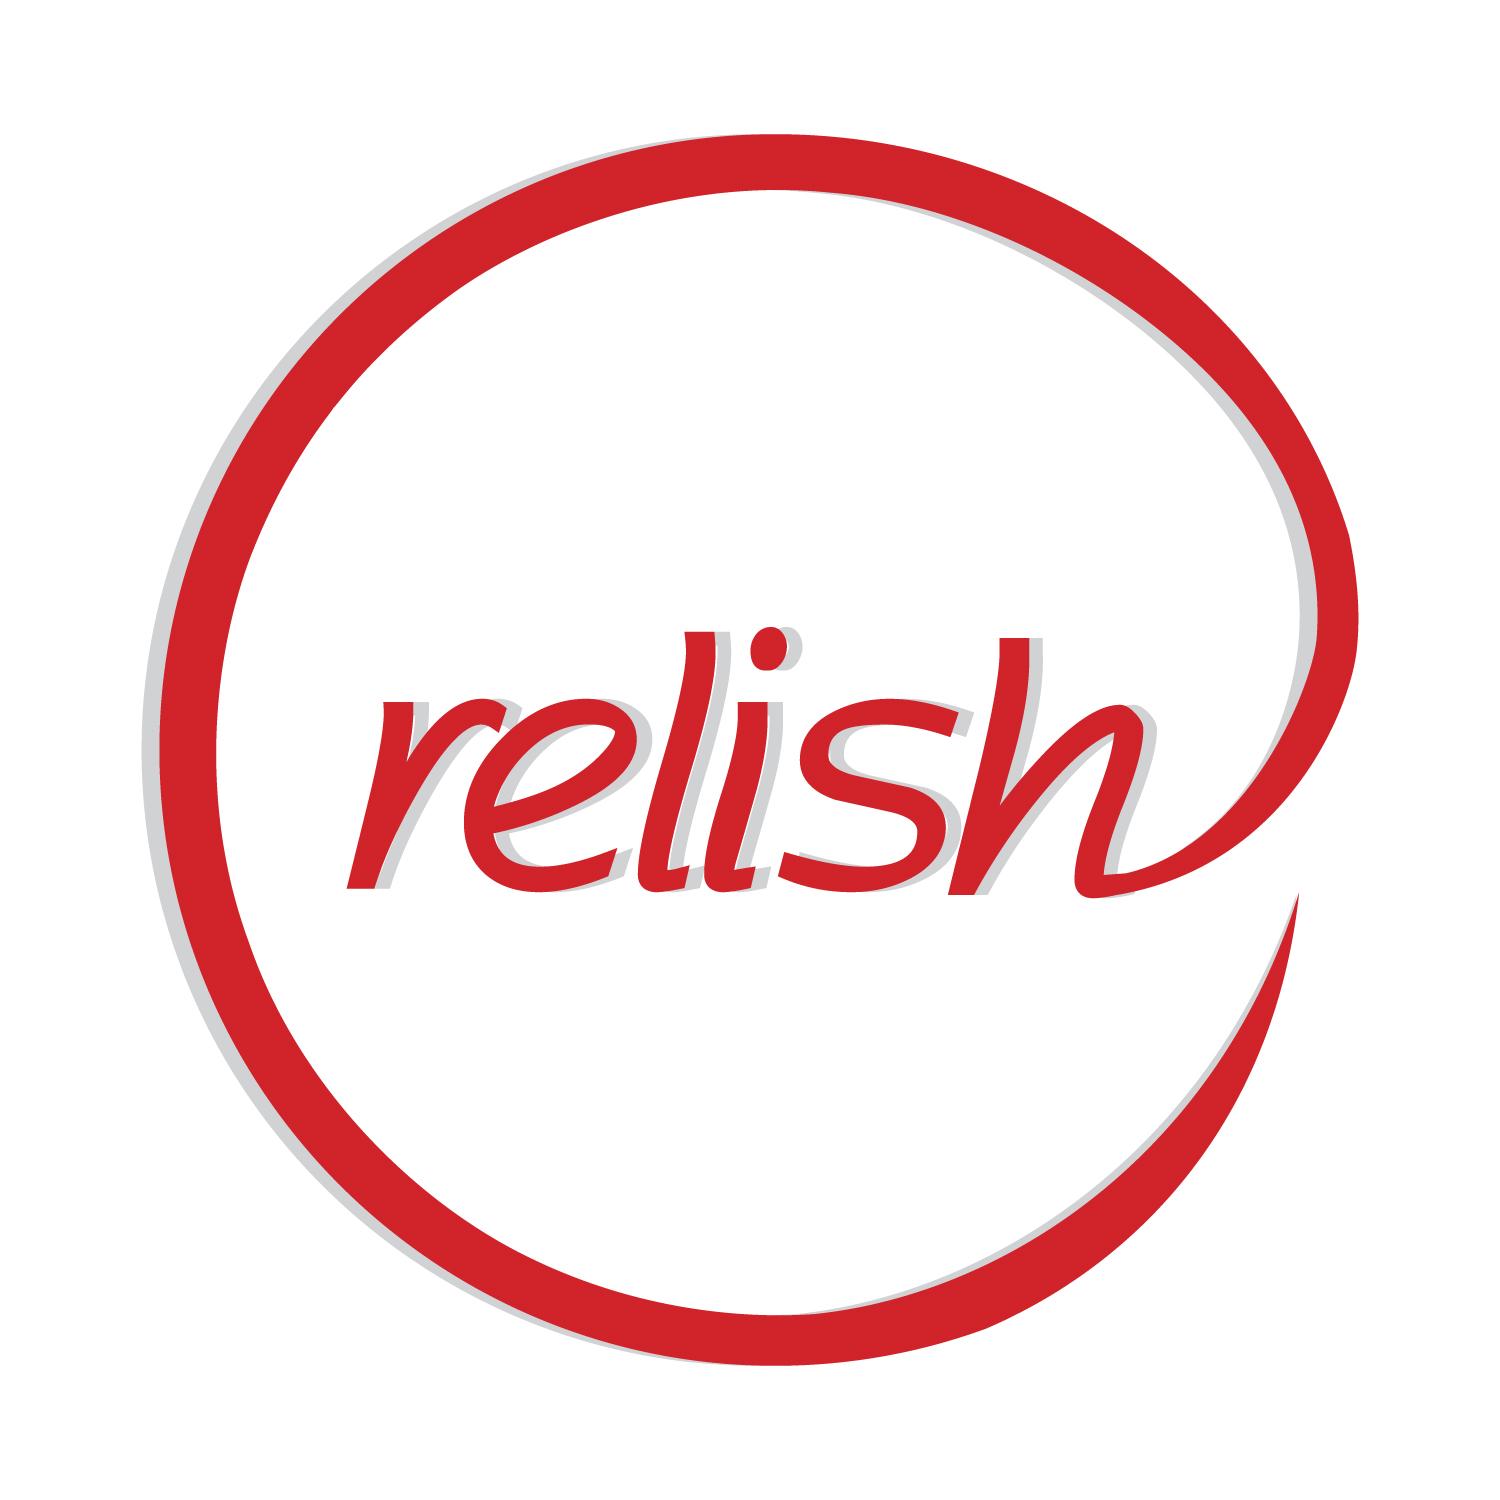 Who Do You Relish? | Singles Events | Raleigh Speed Dating